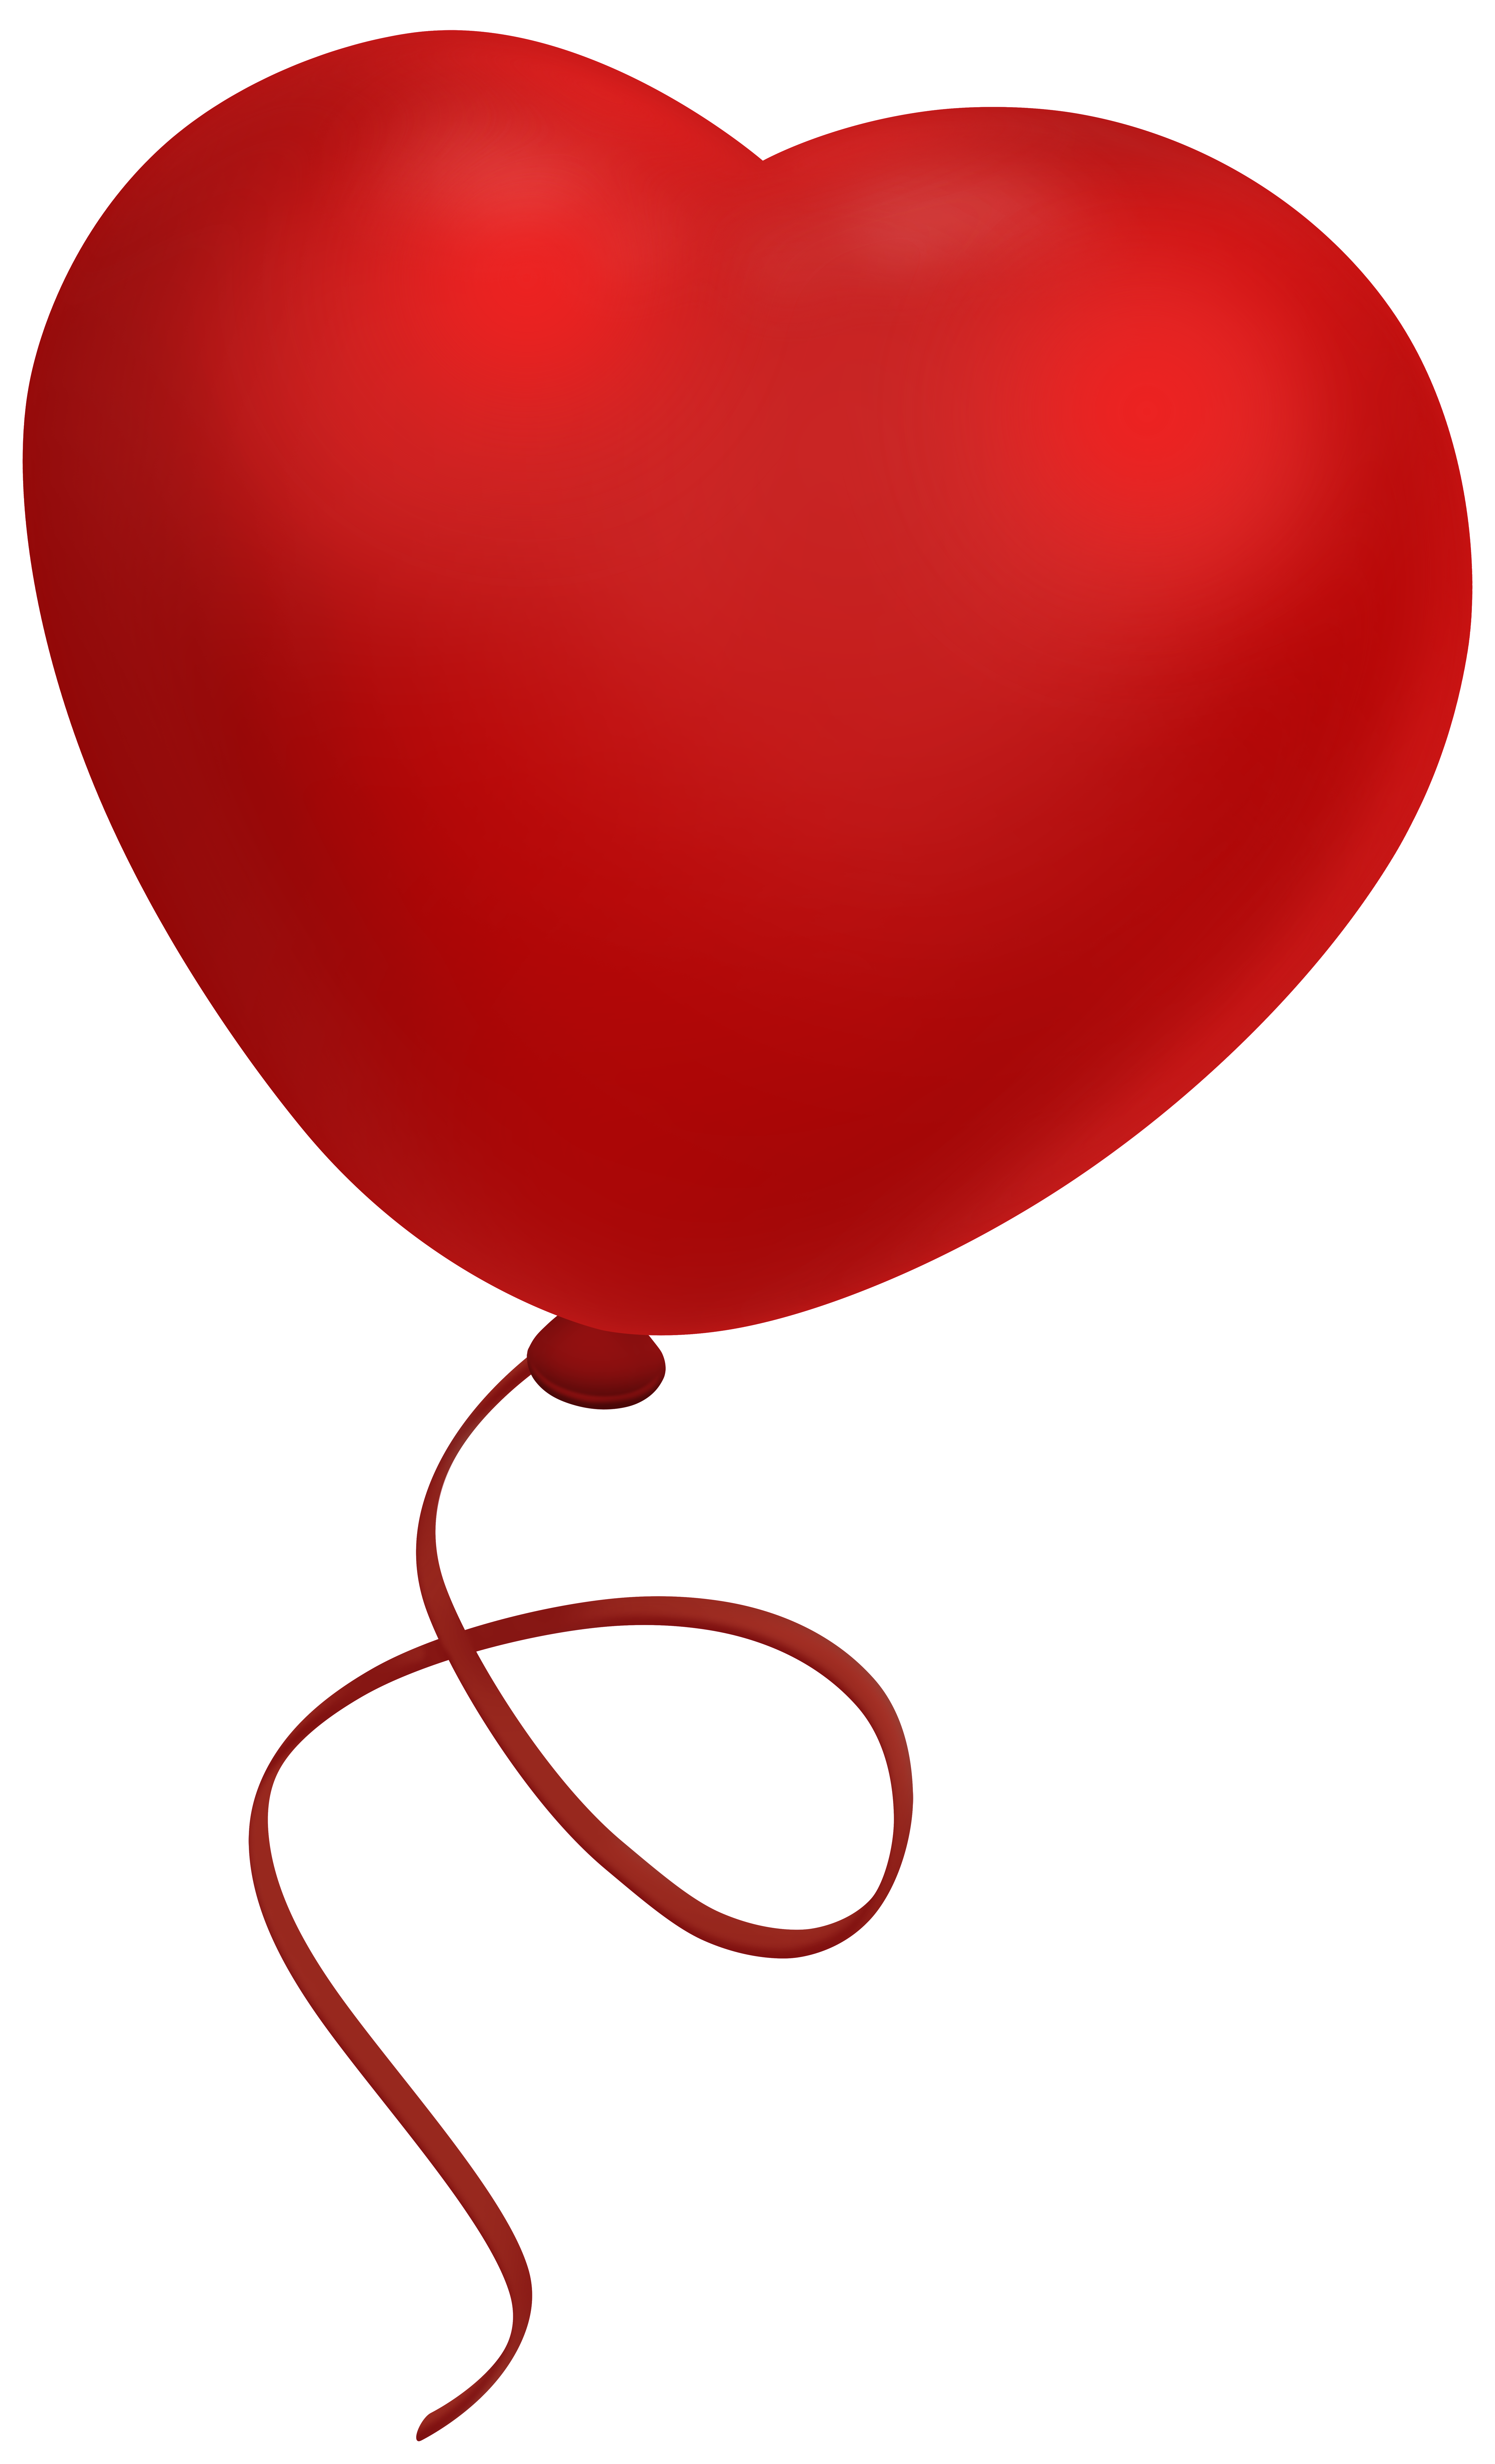 clipart of hearts and balloons